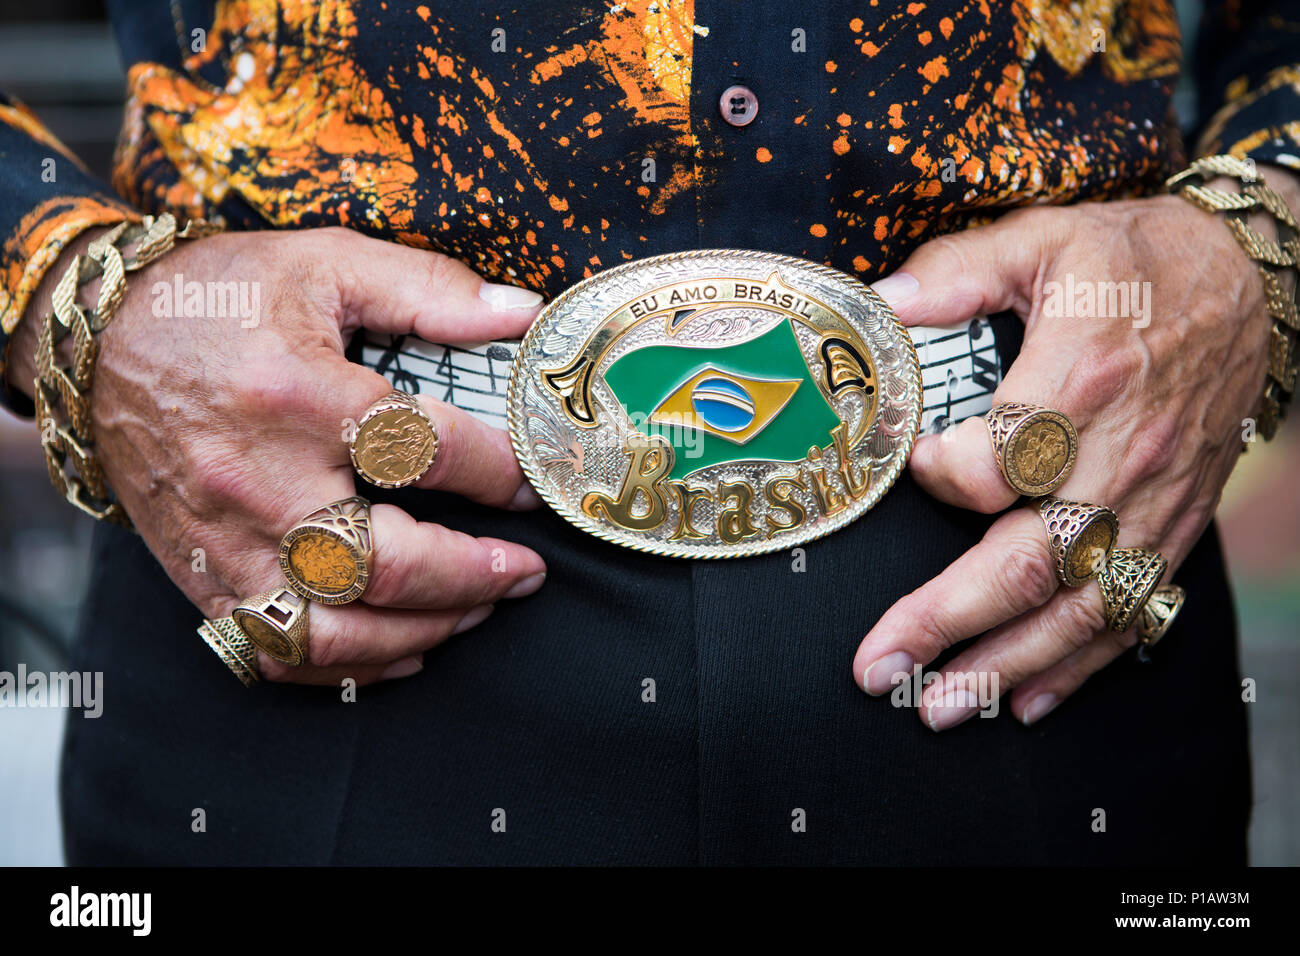 Male hands with lots of sovereign rings holding Brasil cowboy belt buckle.  Retro 1970's shirt Stock Photo - Alamy